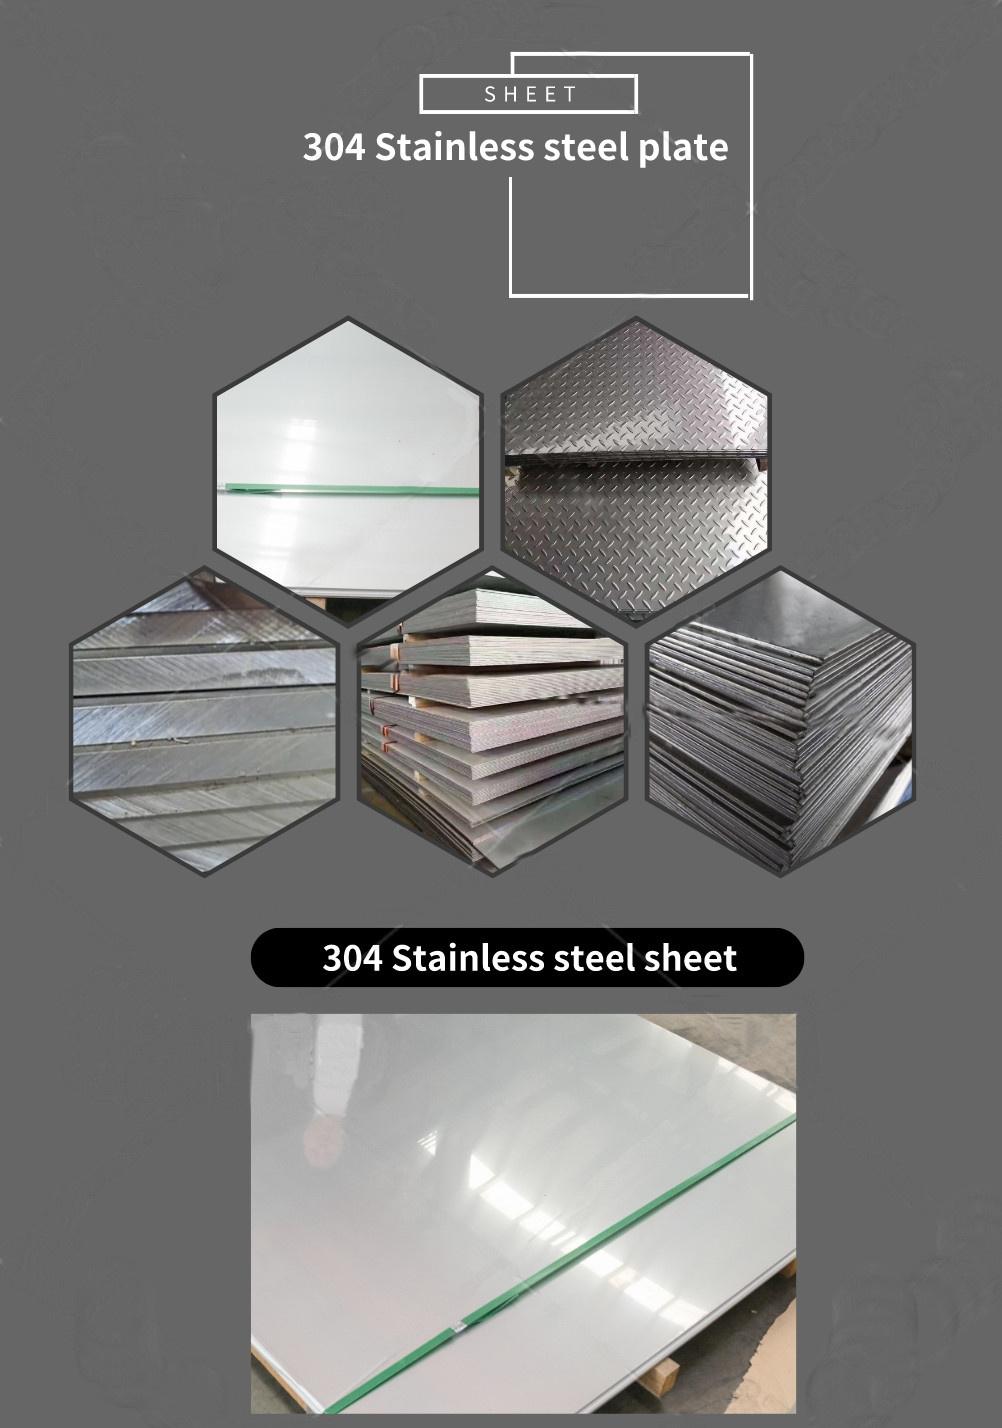 ASTM/GB/JIS 201 329 434 444 Hot Rolled Stainless Steel Plate for Boat Board